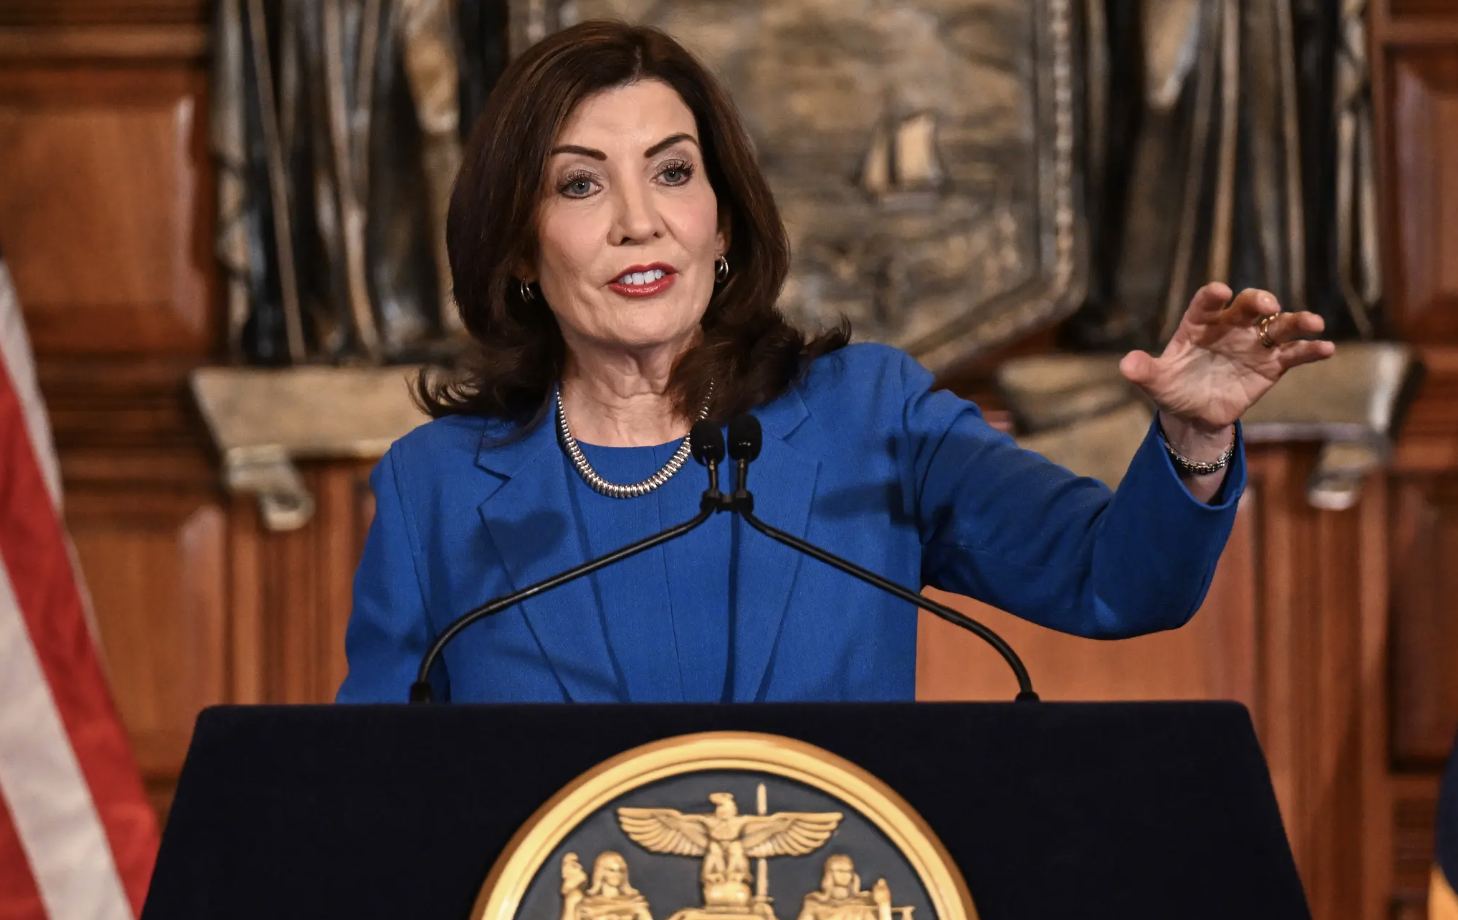 Albany Dems want to scrap Hochul’s proposed education cuts, raise taxes on high earners 1